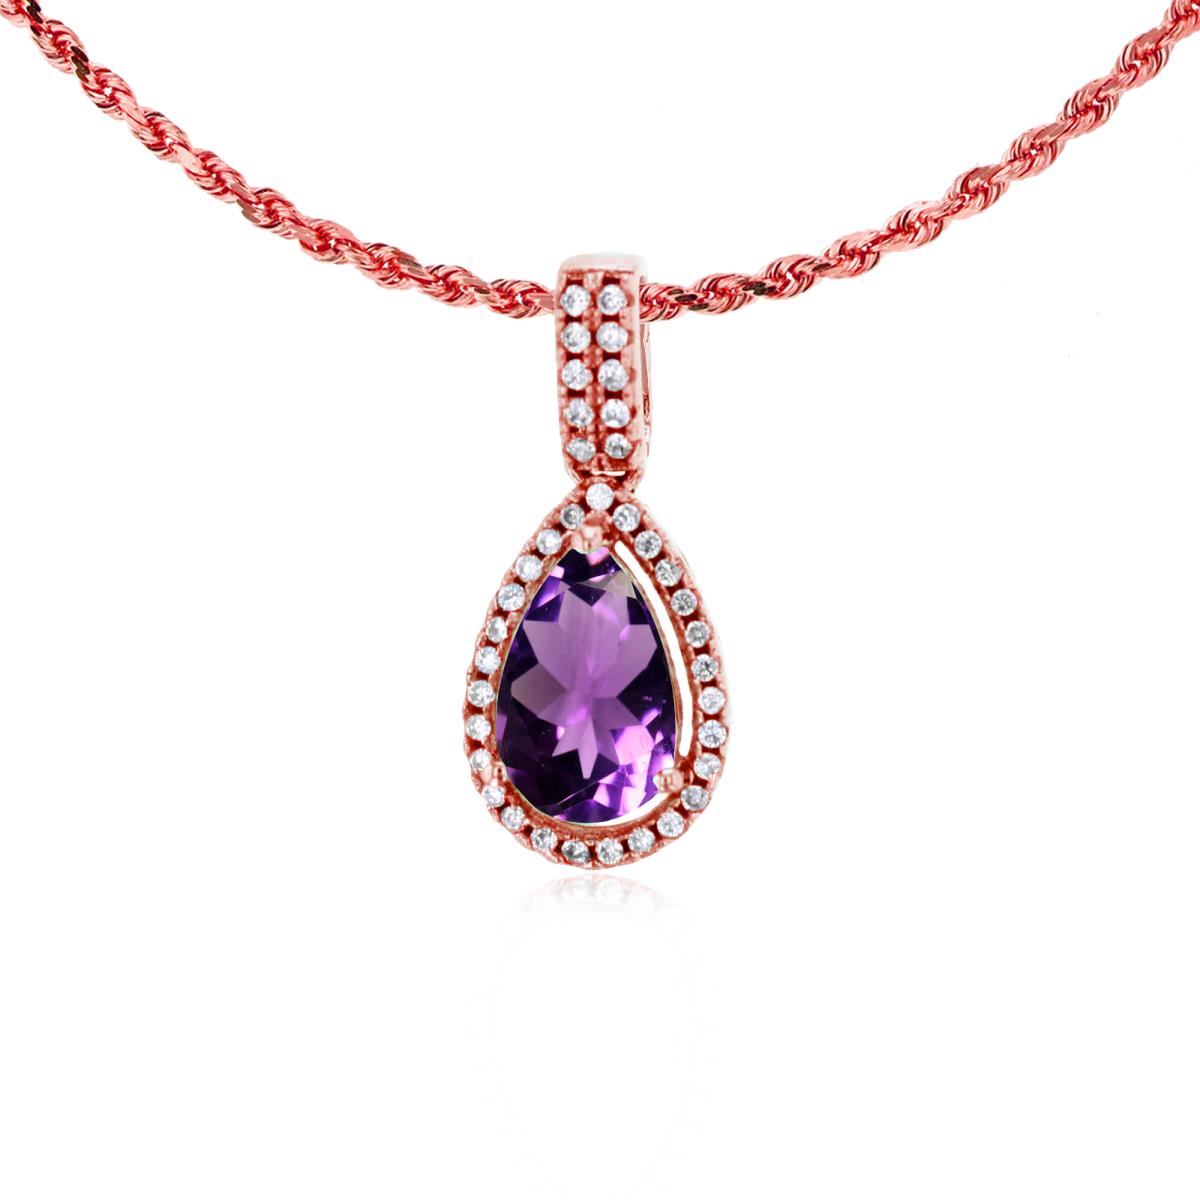 10K Rose Gold 8x5mm Pear Cut Amethyst & 0.11 CTTW Diamond Halo 18" Rope Chain Necklace